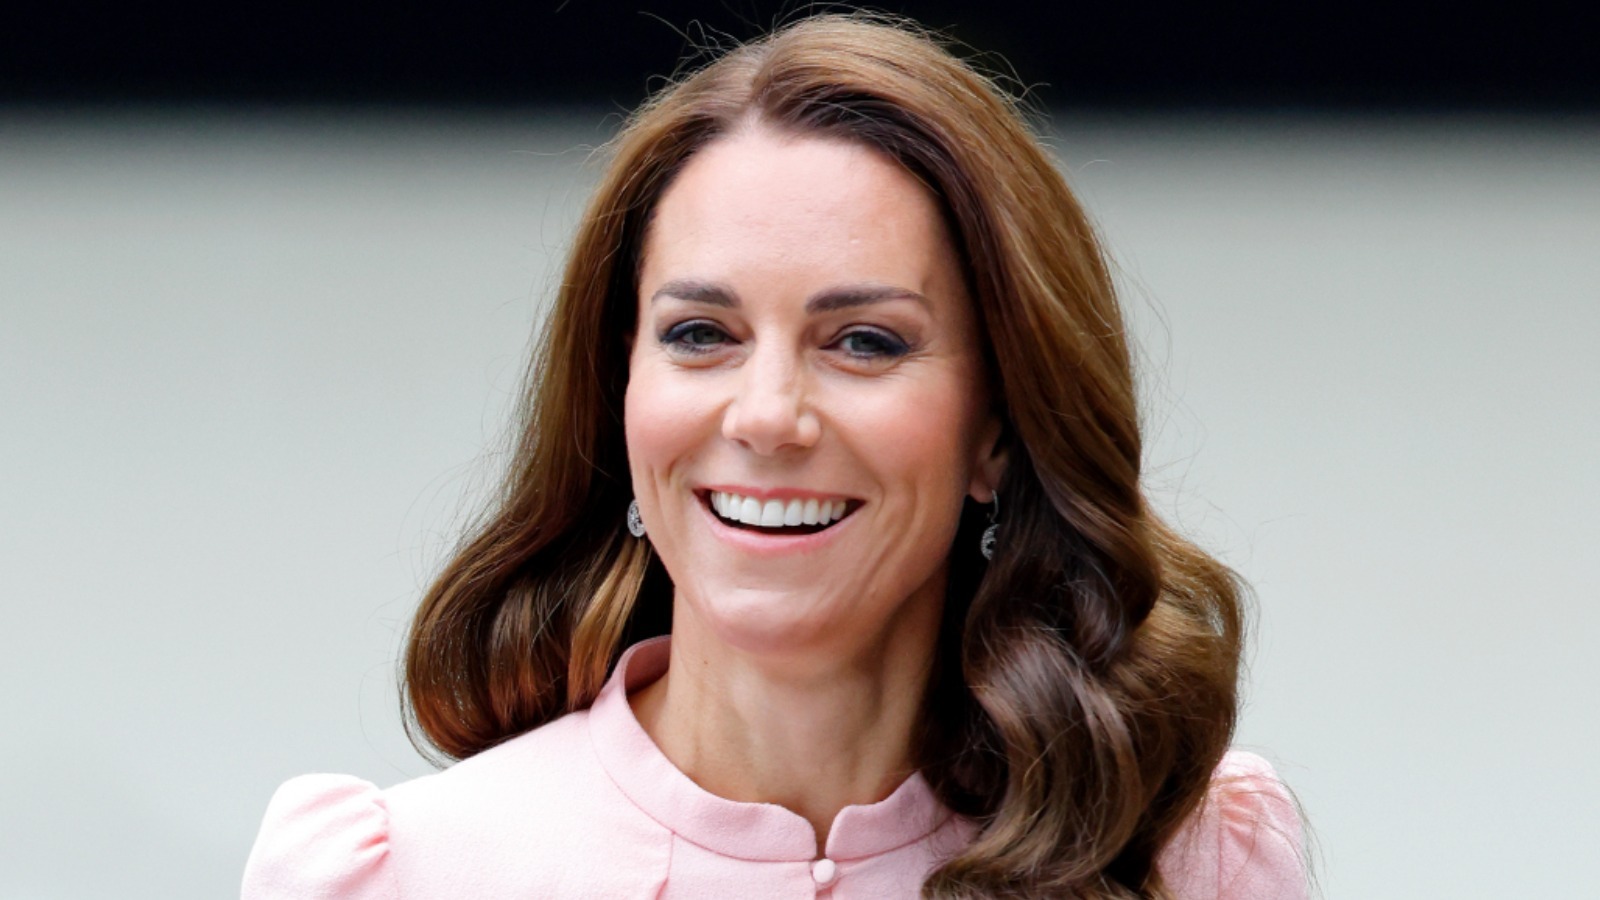 What Did Kate Middleton Inherit From Queen Elizabeth?